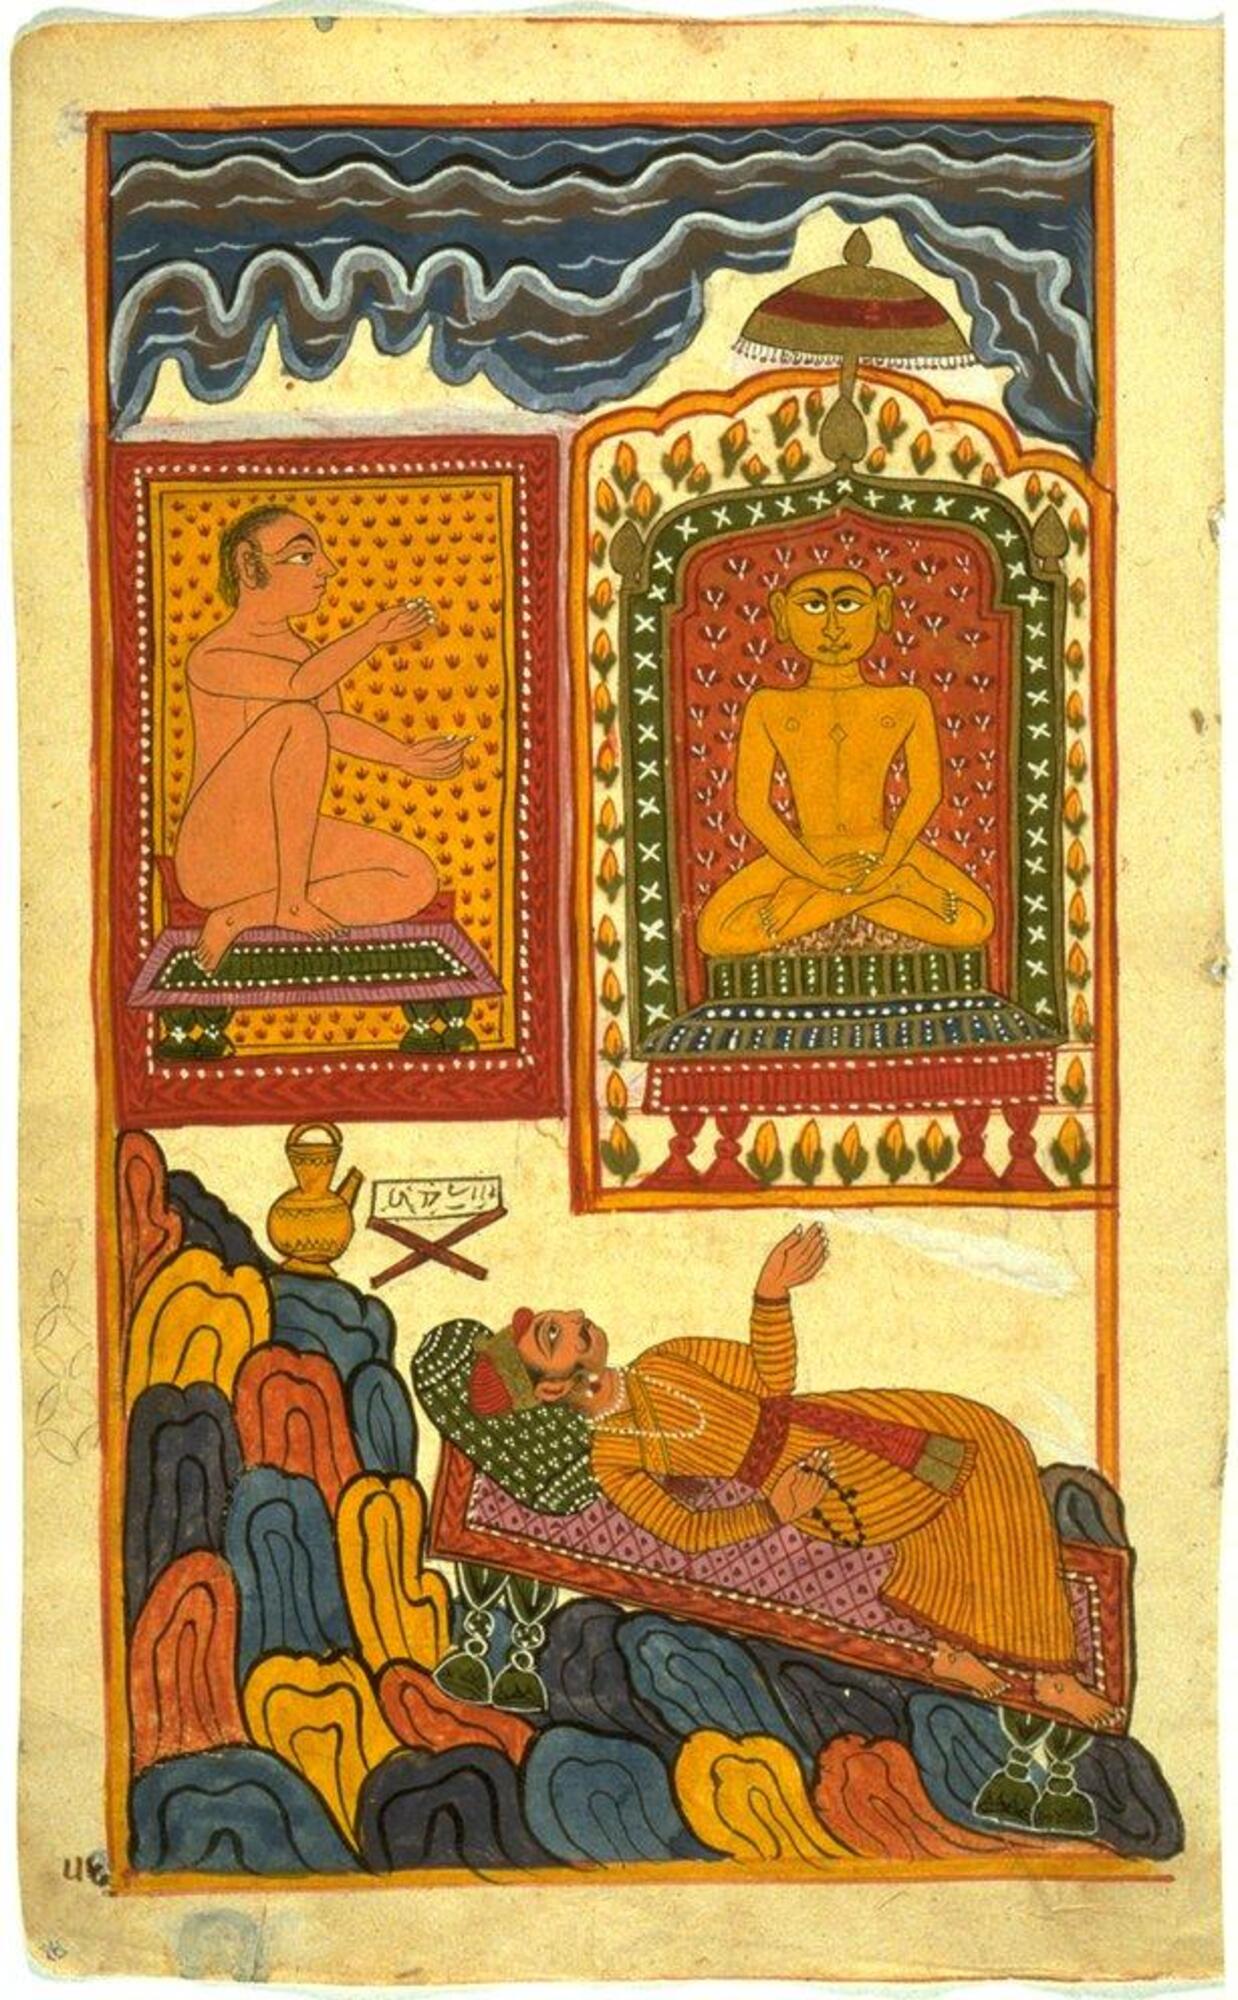 A man reclines on a carpet or cloth, and looks up at two figures above him. On the right, a deity sits cross-legged on a pedestal with a canopy over its head. To the left, another figure faces the deity, also on a pedestal carpet. He appears to be naked, and raises his in gesture towards the deity. A metal lamp or ewer rests below him, on what appears to be an abstract mountain, on which the reclining man also lies. He holds what may be prayer beads, and wears robes with stripes and his covered head rests on a pillow.